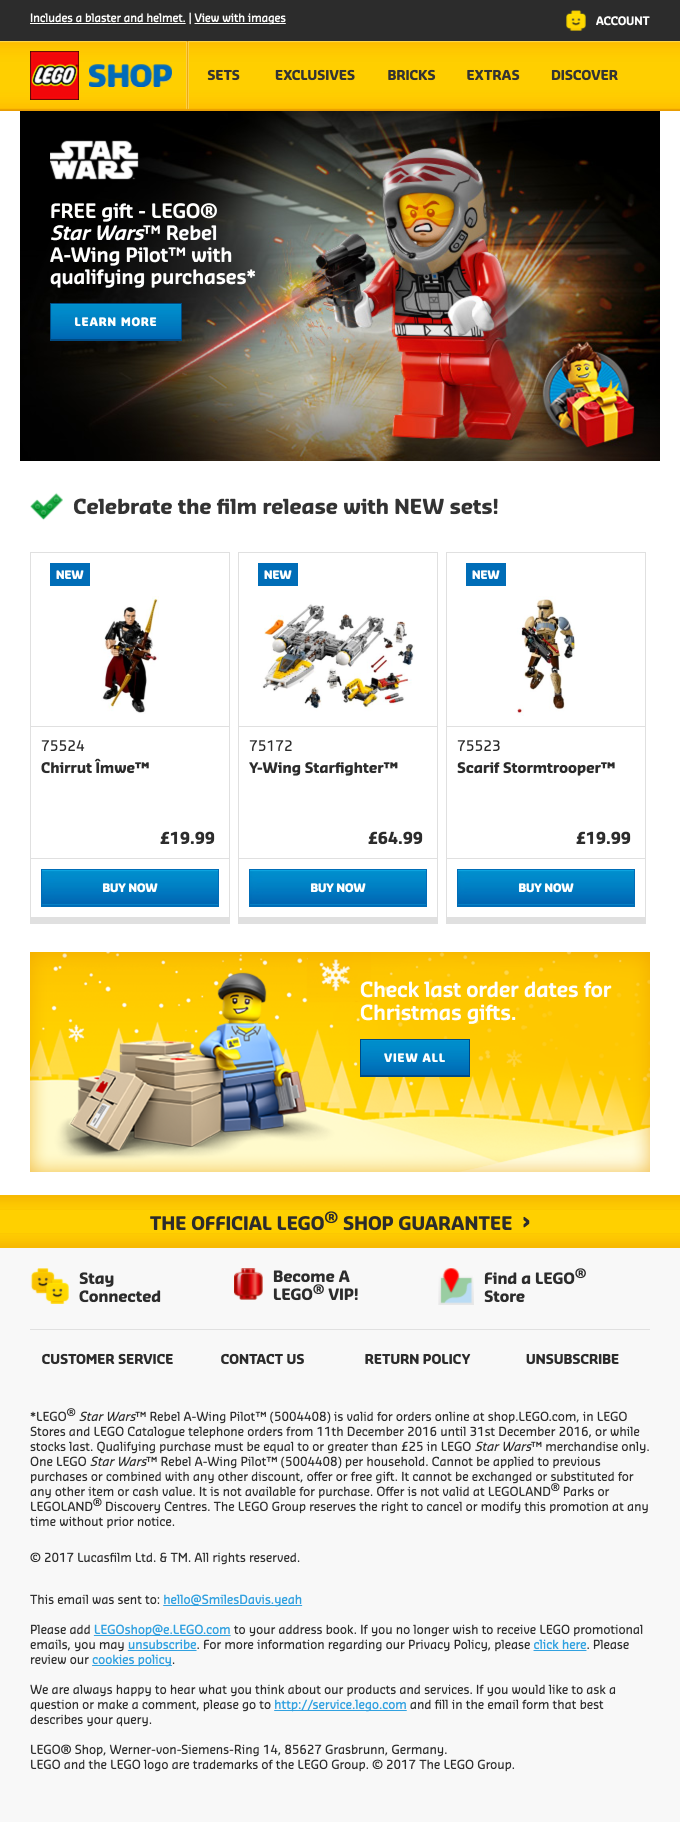 NEW LEGO® Star Wars™ sets and a free GIFT!